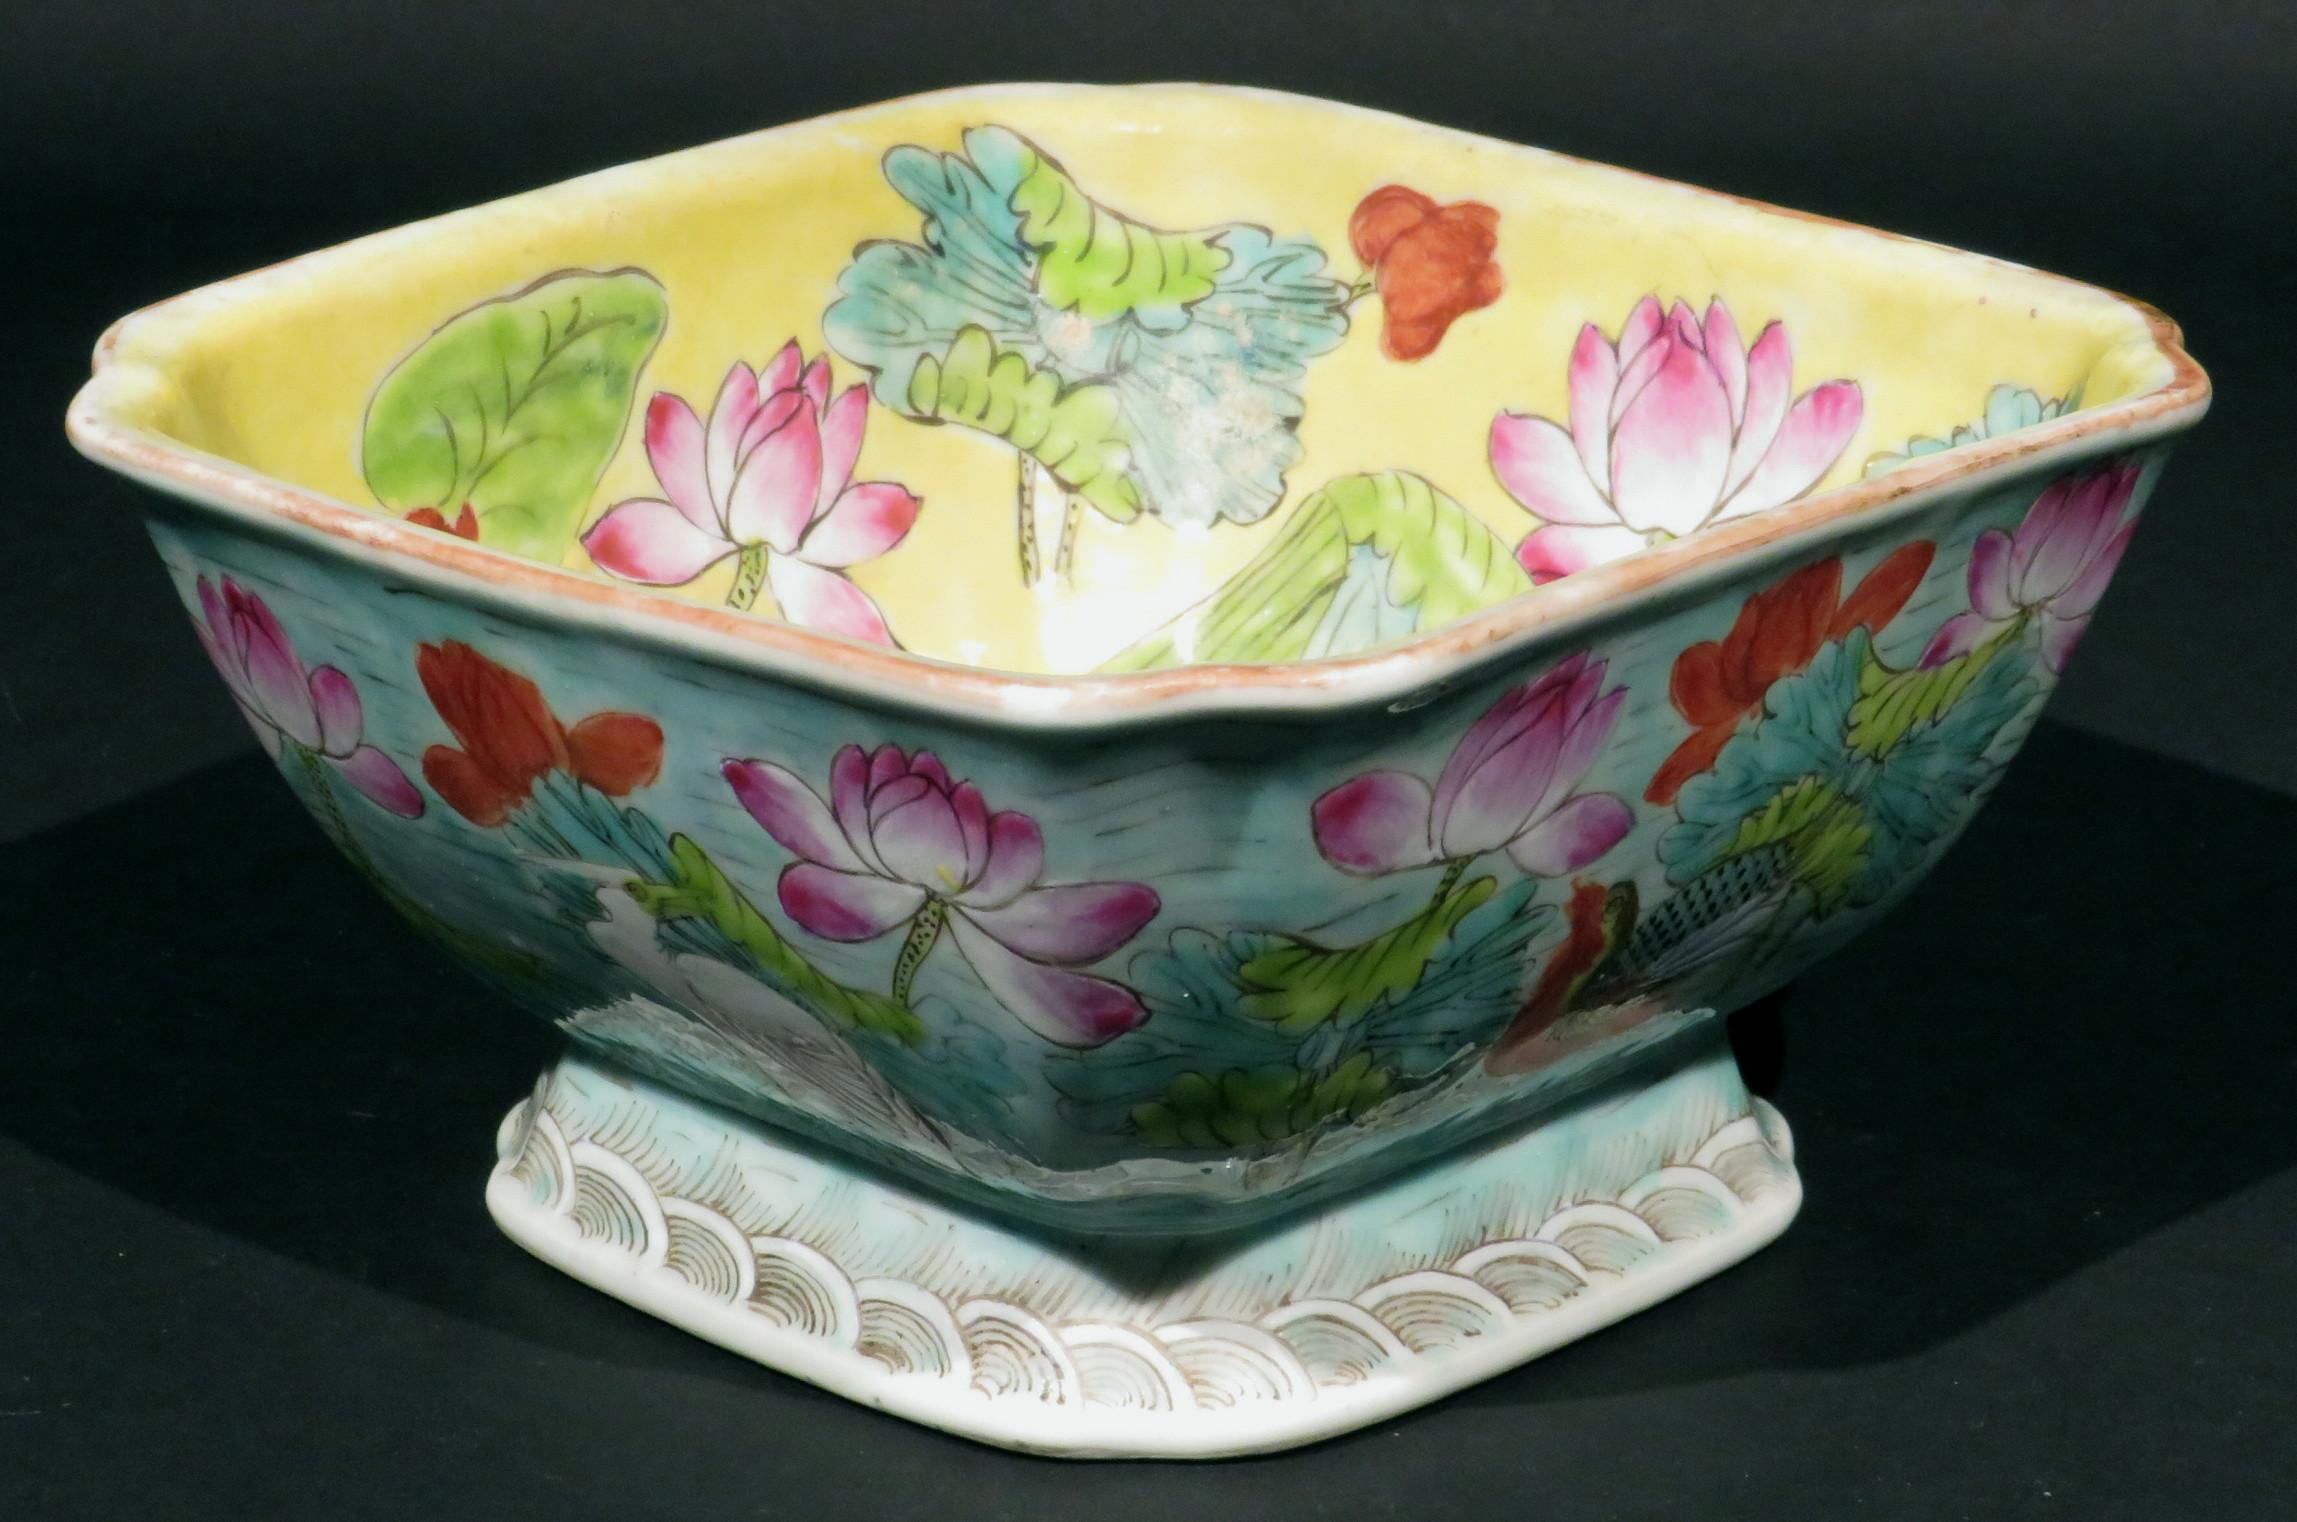 A very attractive Chinese export enamelled porcelain bowl, having a squared body with inverted corners and traces or red oxide along the rim, decorated on the interior with hand painted enamels of flower blossoms & waterfowl against a yellow field,